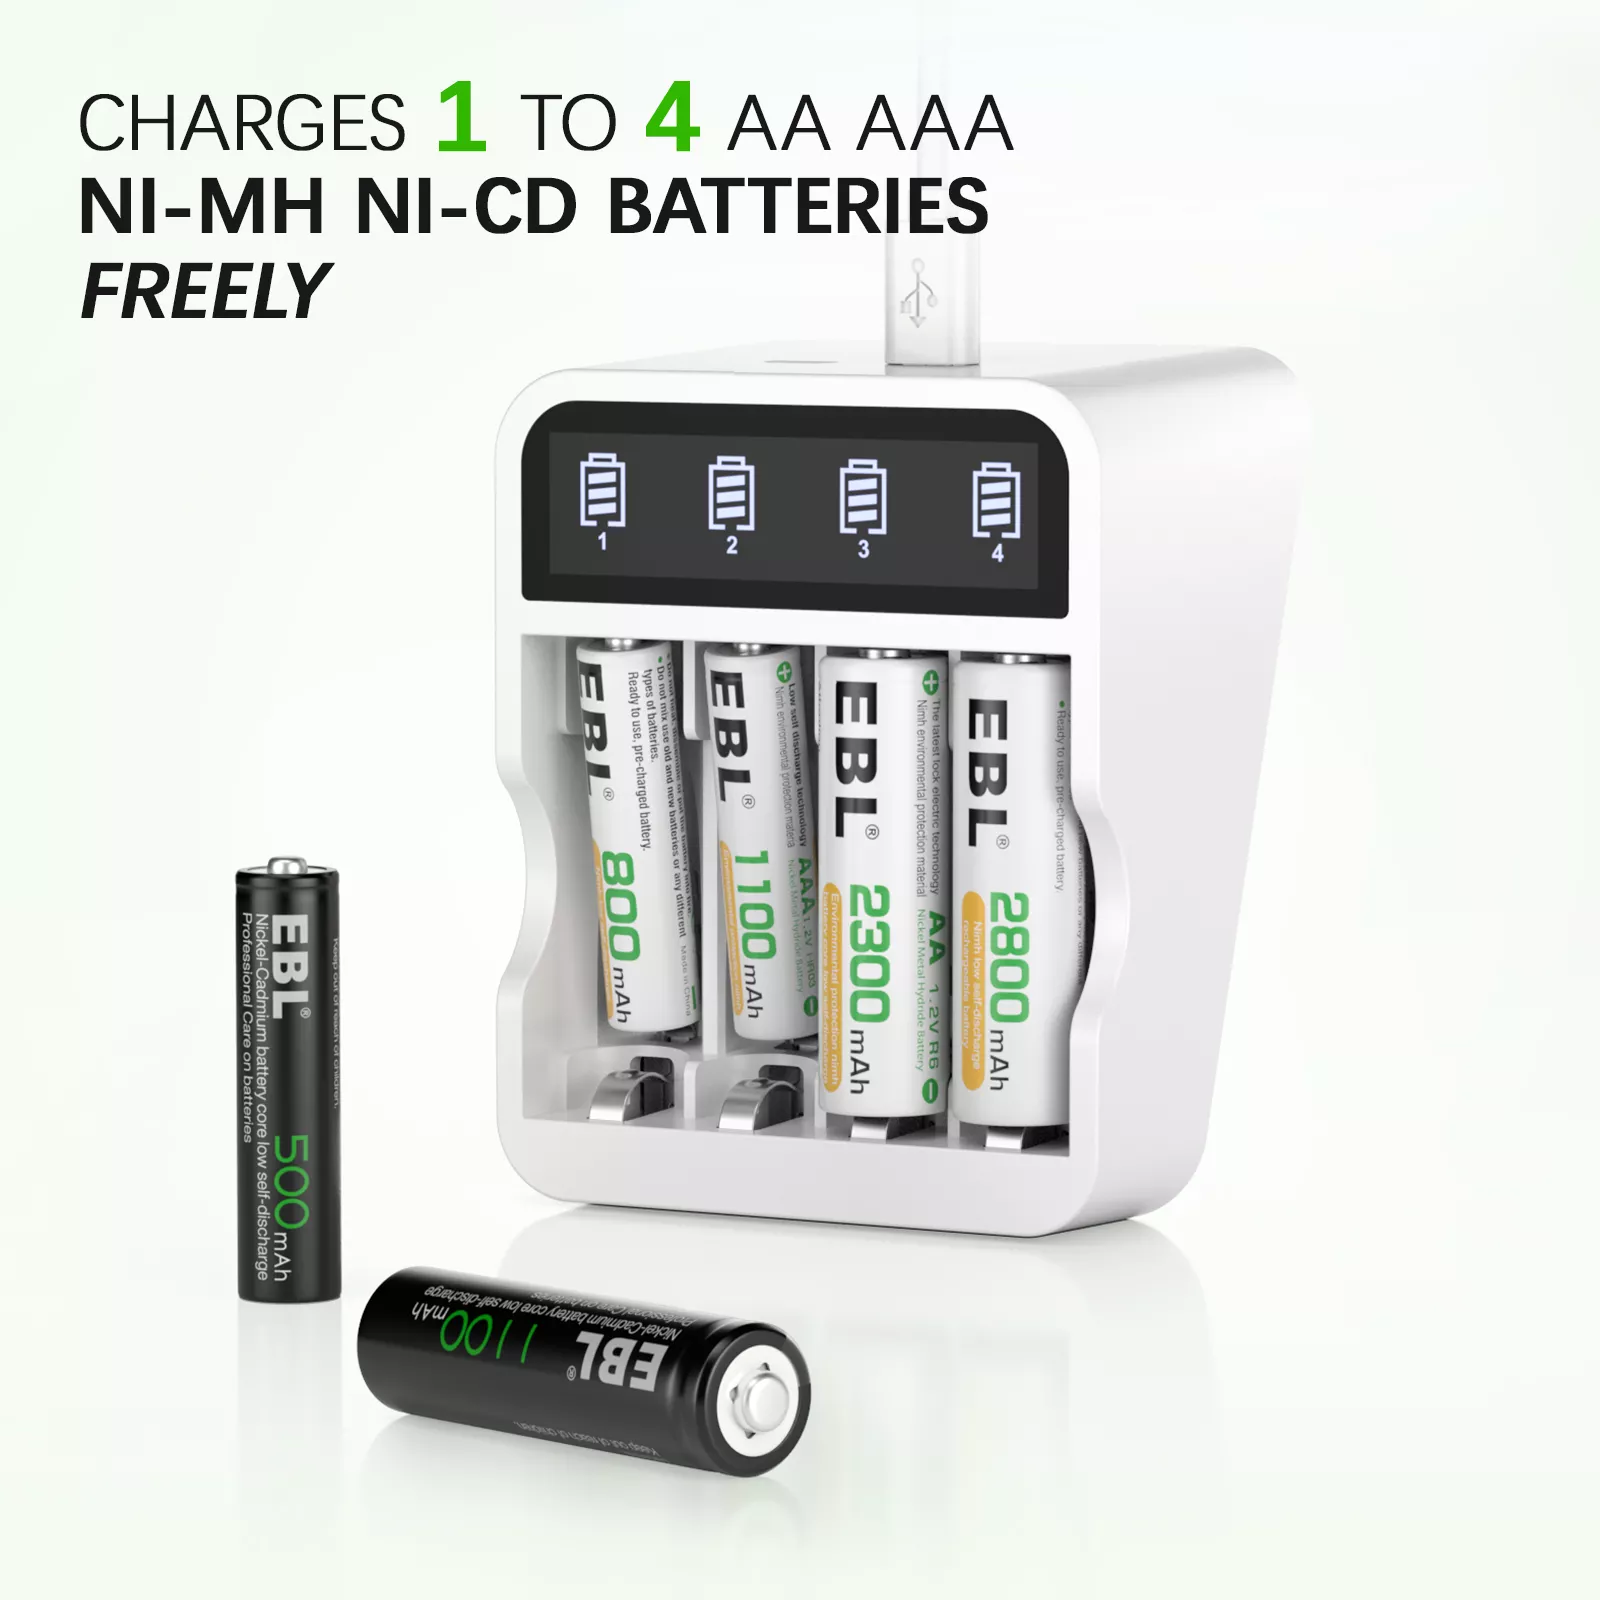 EBL AA AAA Rechargeable Batteries (4-Pack, 1100mAh + 4-Pack, 2800mAh) with  8 Bay Battery Charger for AA AAA Ni-CD Ni-MH Replacement Battery 